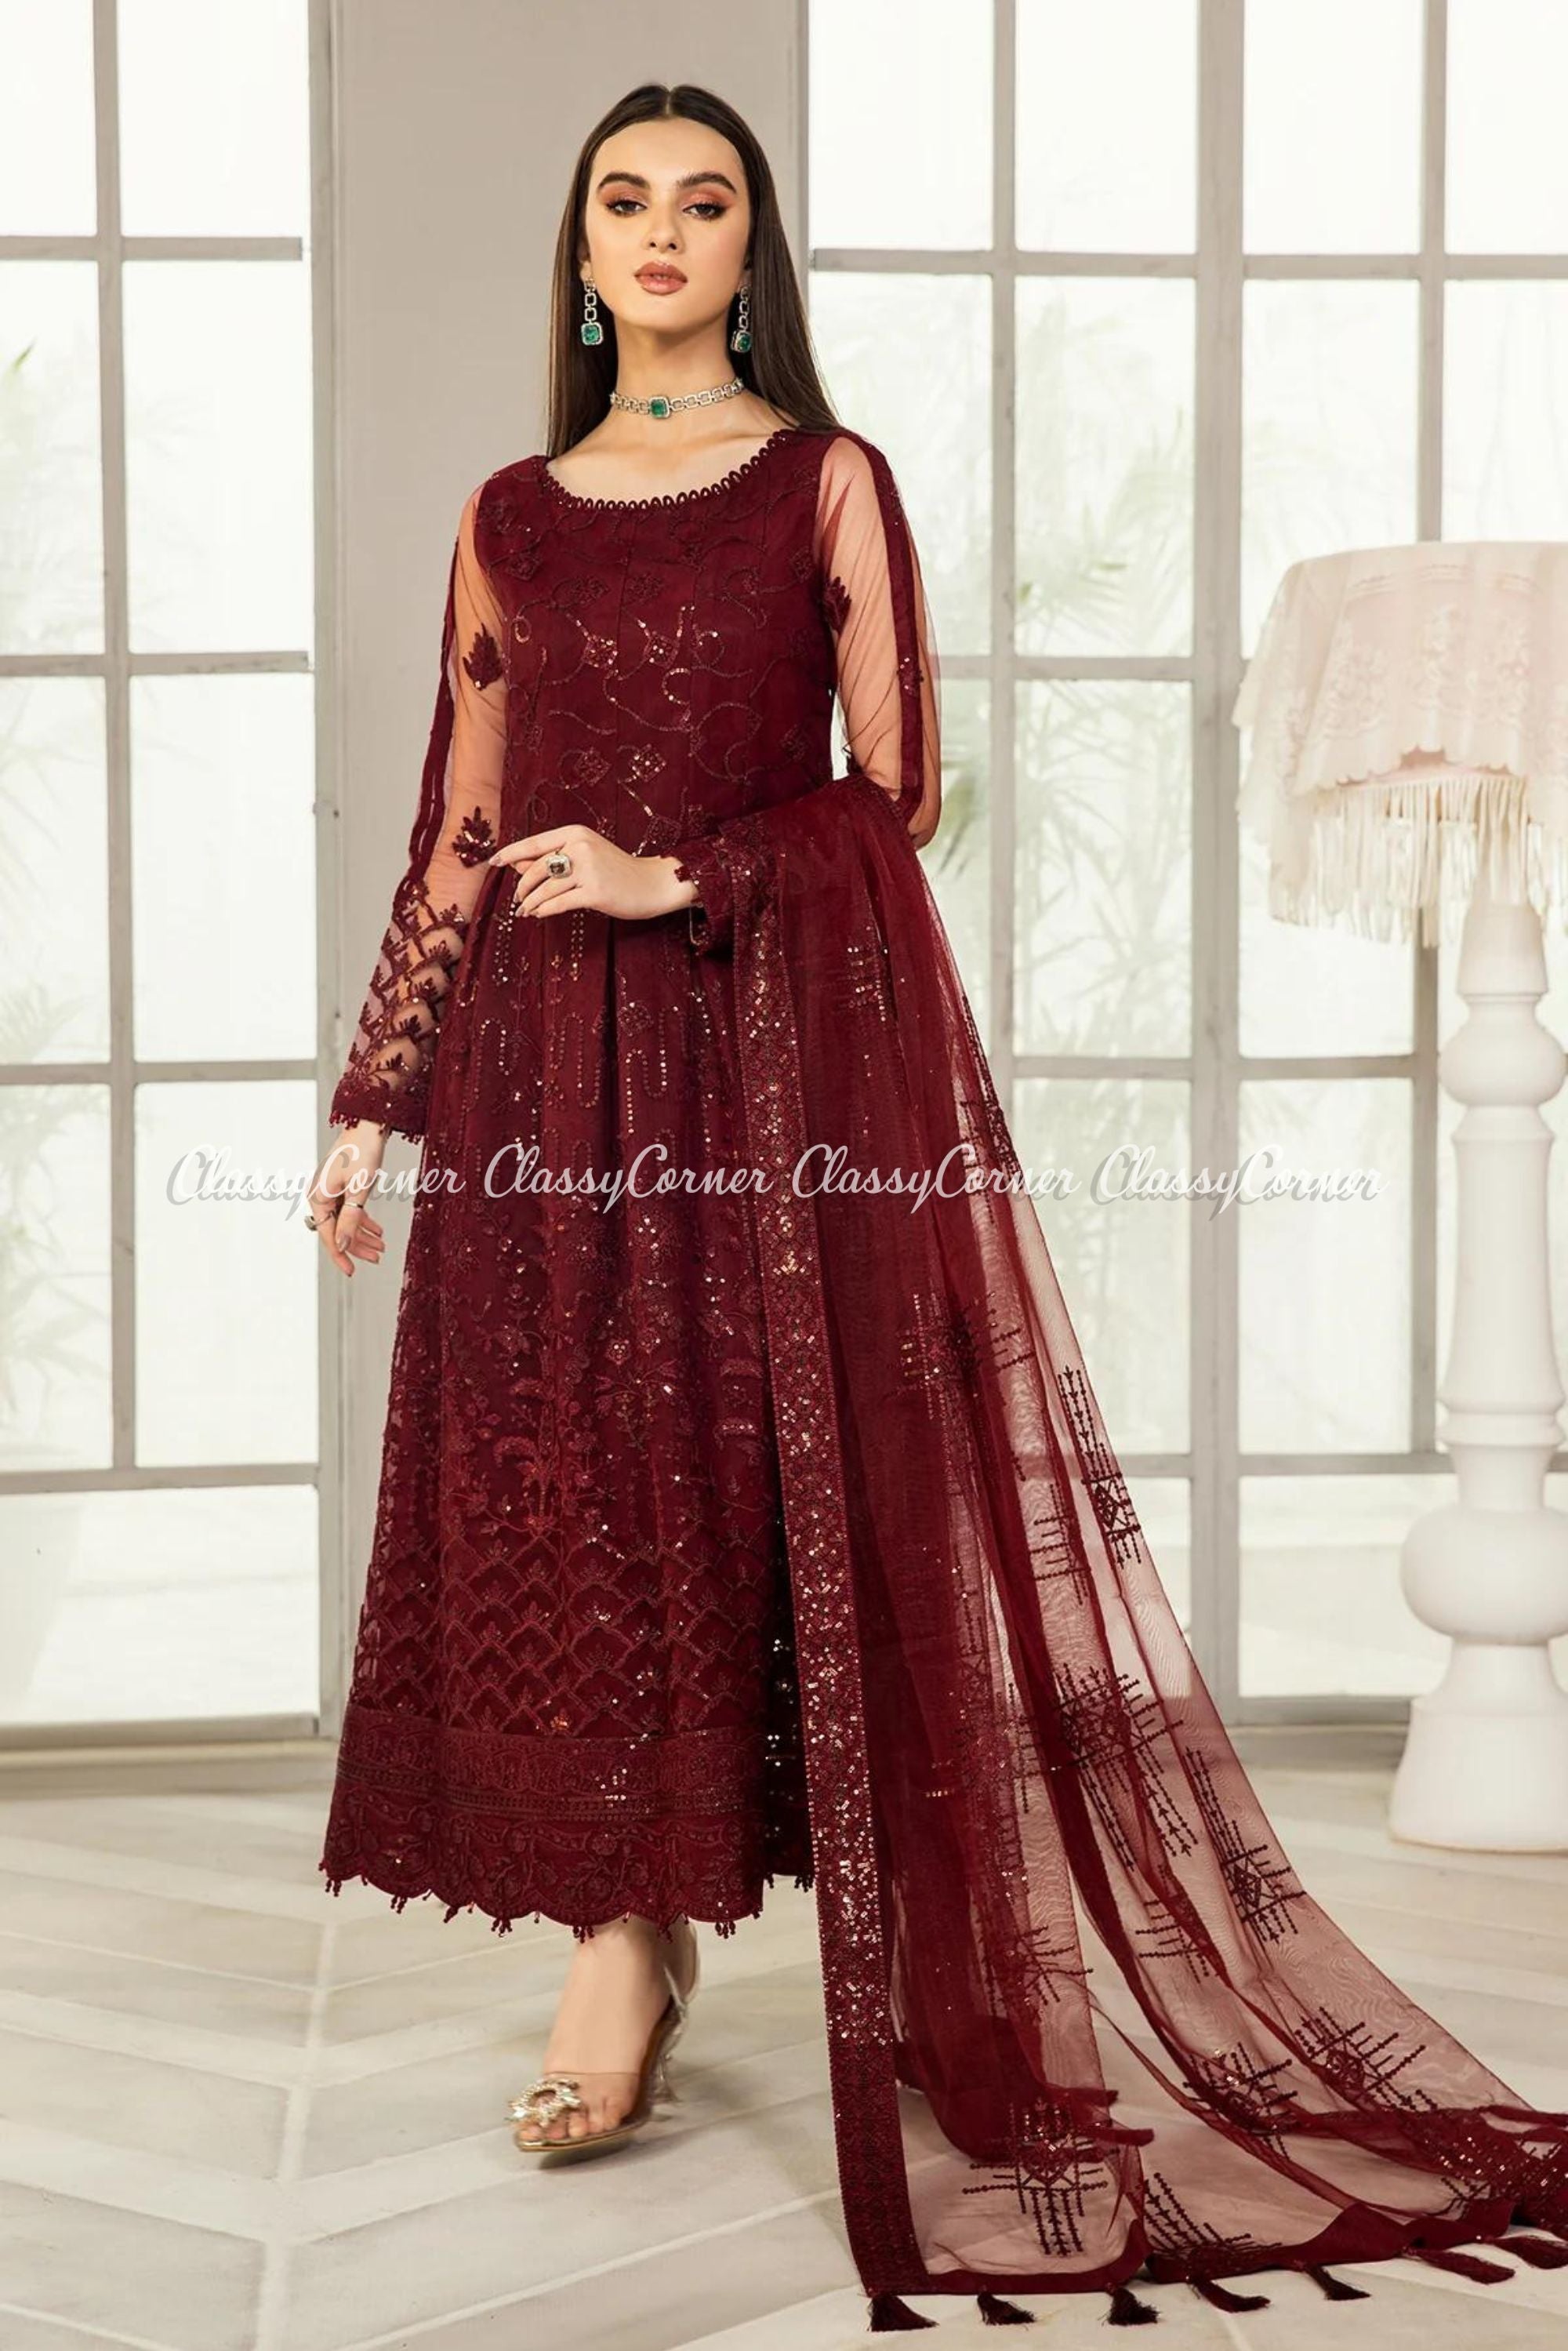 Pakistani Formal Outfits For Ladies Sydney